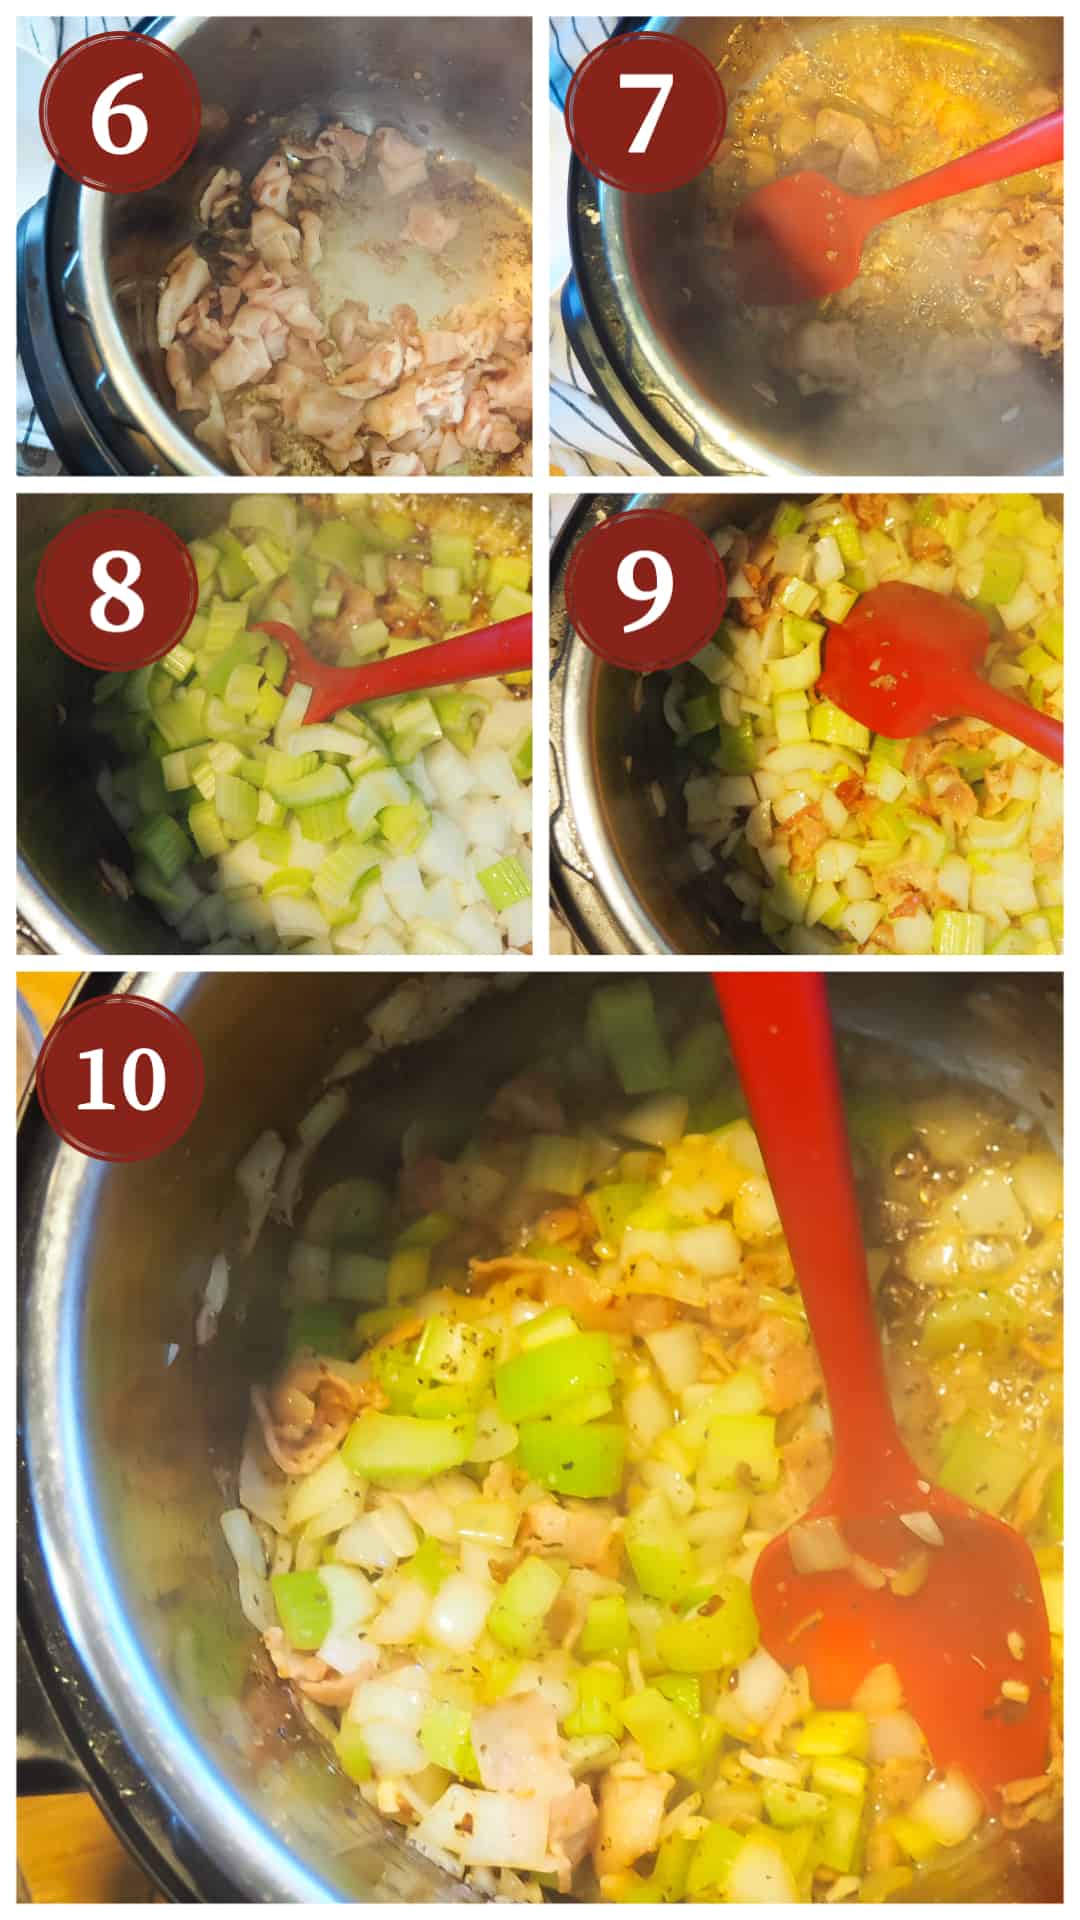 A process collage of images for making pasta e fagioli in an instant pot, steps 6 - 10.